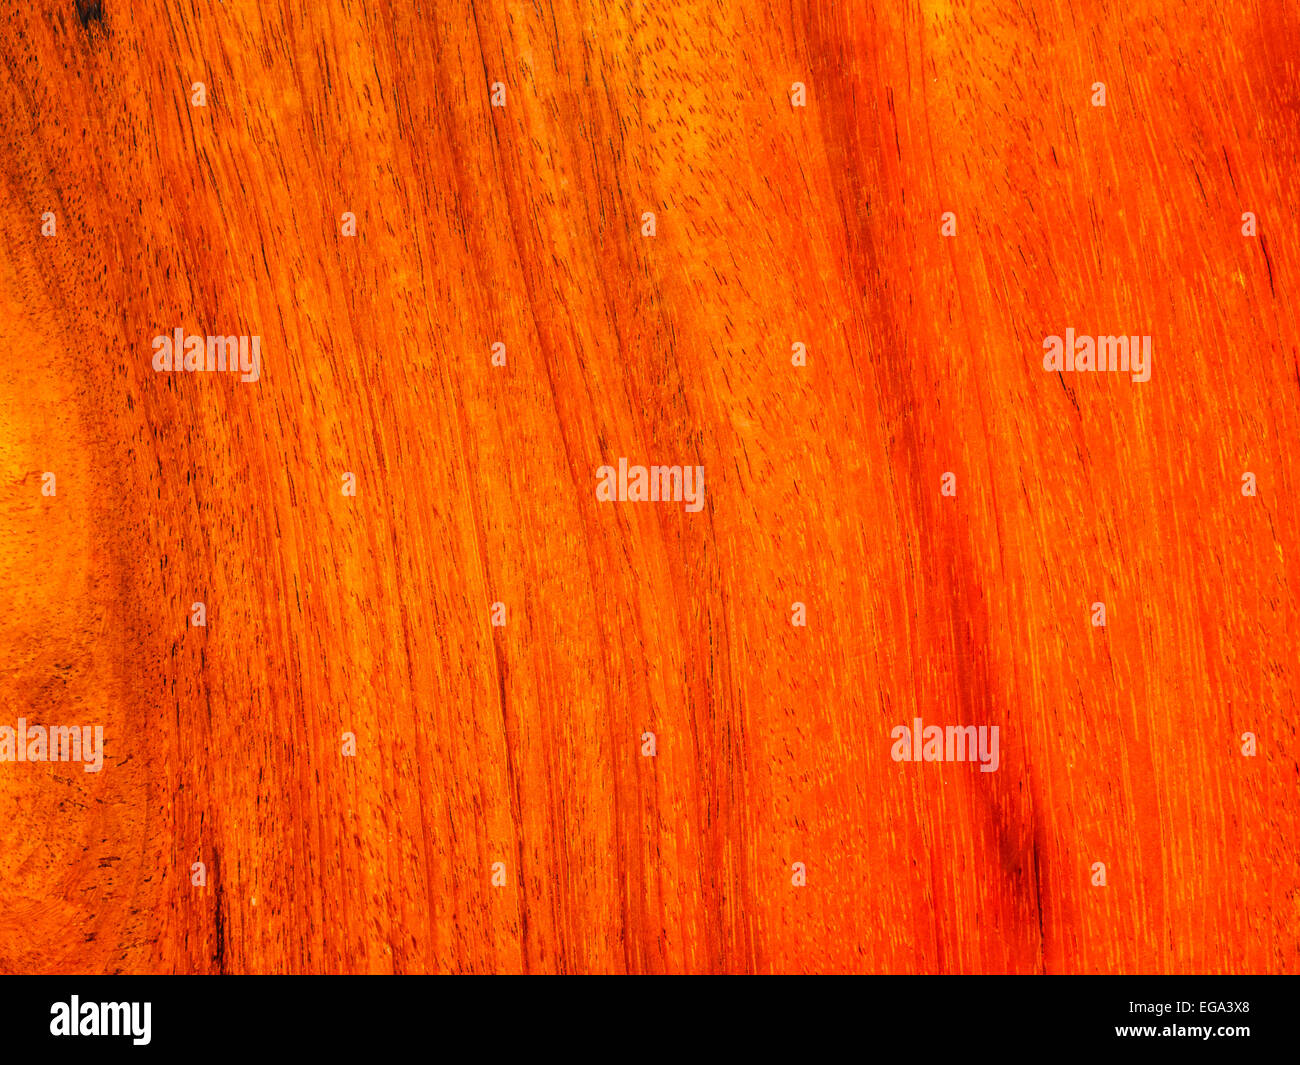 Natural wood texture, using as a background Stock Photo